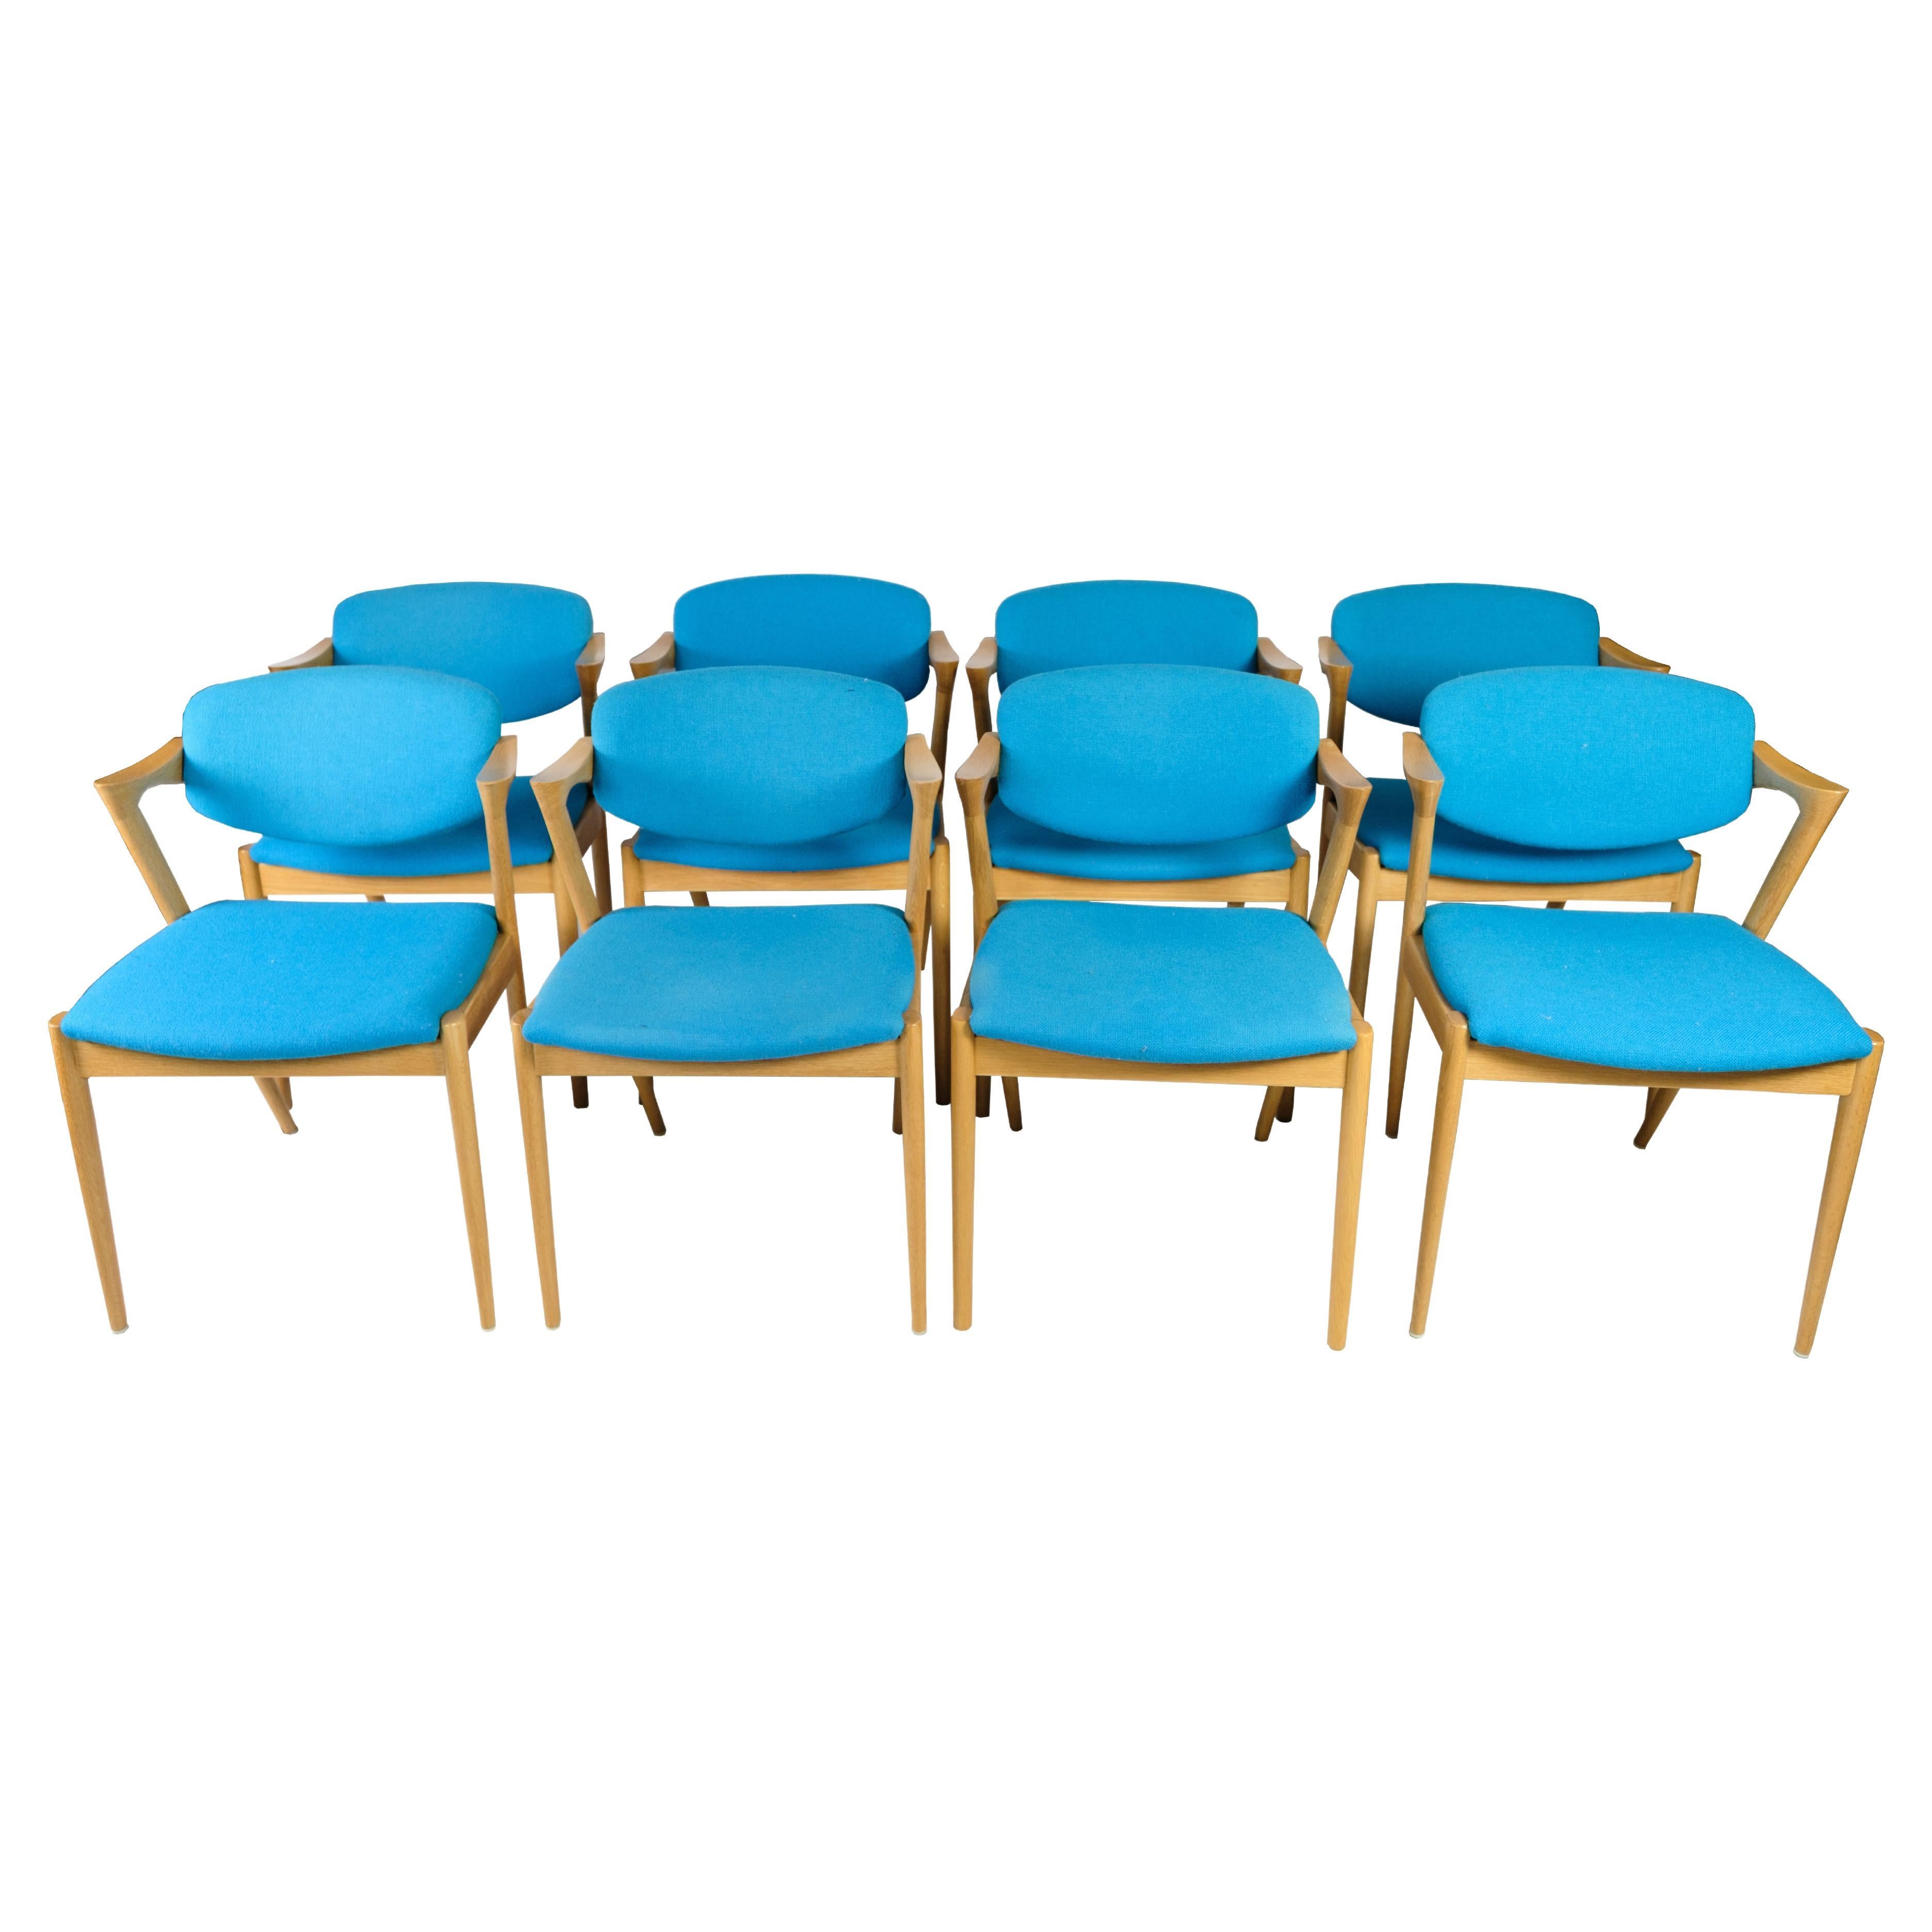 Set of Eight Dining Room Chairs, Model 42, Designed by Kai Kristiansen im Angebot